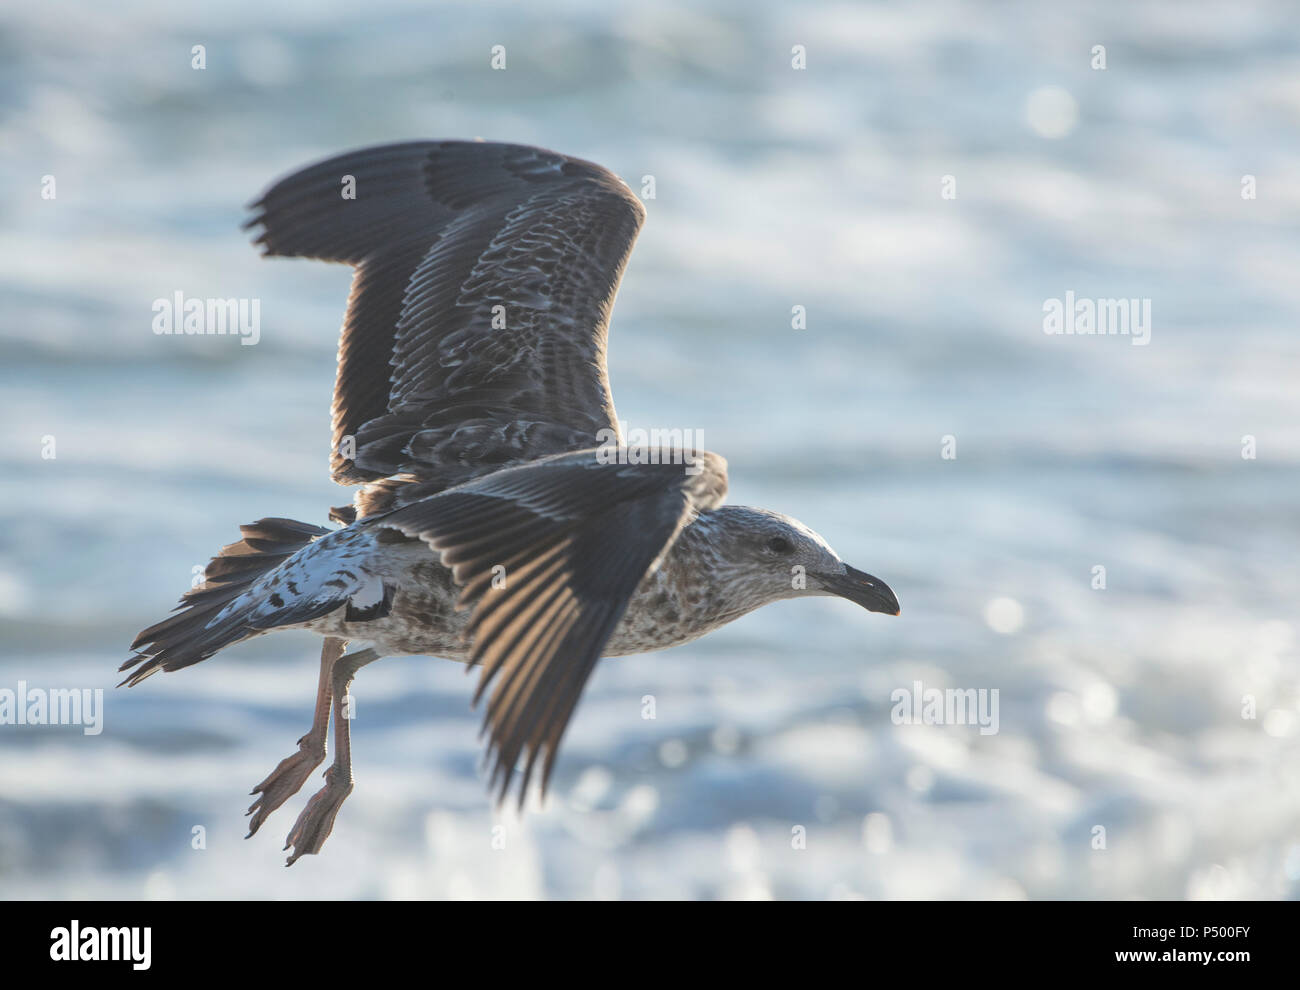 Africa, South Africa, Cape Town, Kelp gull flying over the sea Stock Photo